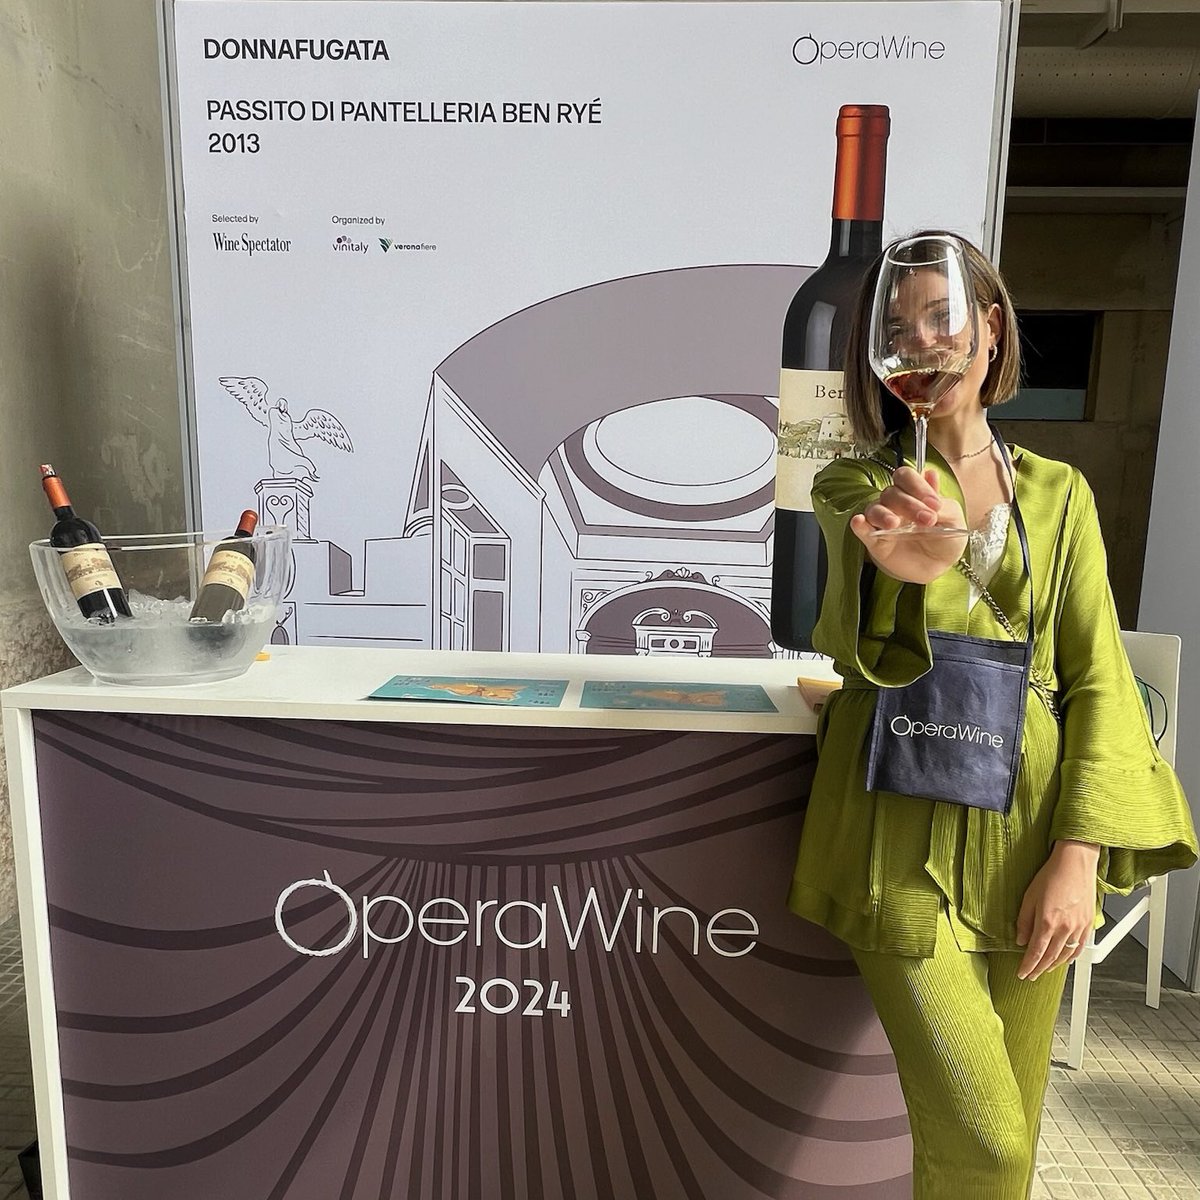 Ben Ryé 2013 among the “Best Italian wines”, selected for @OperaWine by @WineSpectator. José Rallo, Antonio Rallo and Gabriella Favara talked about the iconic Passito di Pantelleria to wine experts from all over the world.🍷 Discover more of BenRyé: bit.ly/DF_Ben-Rye